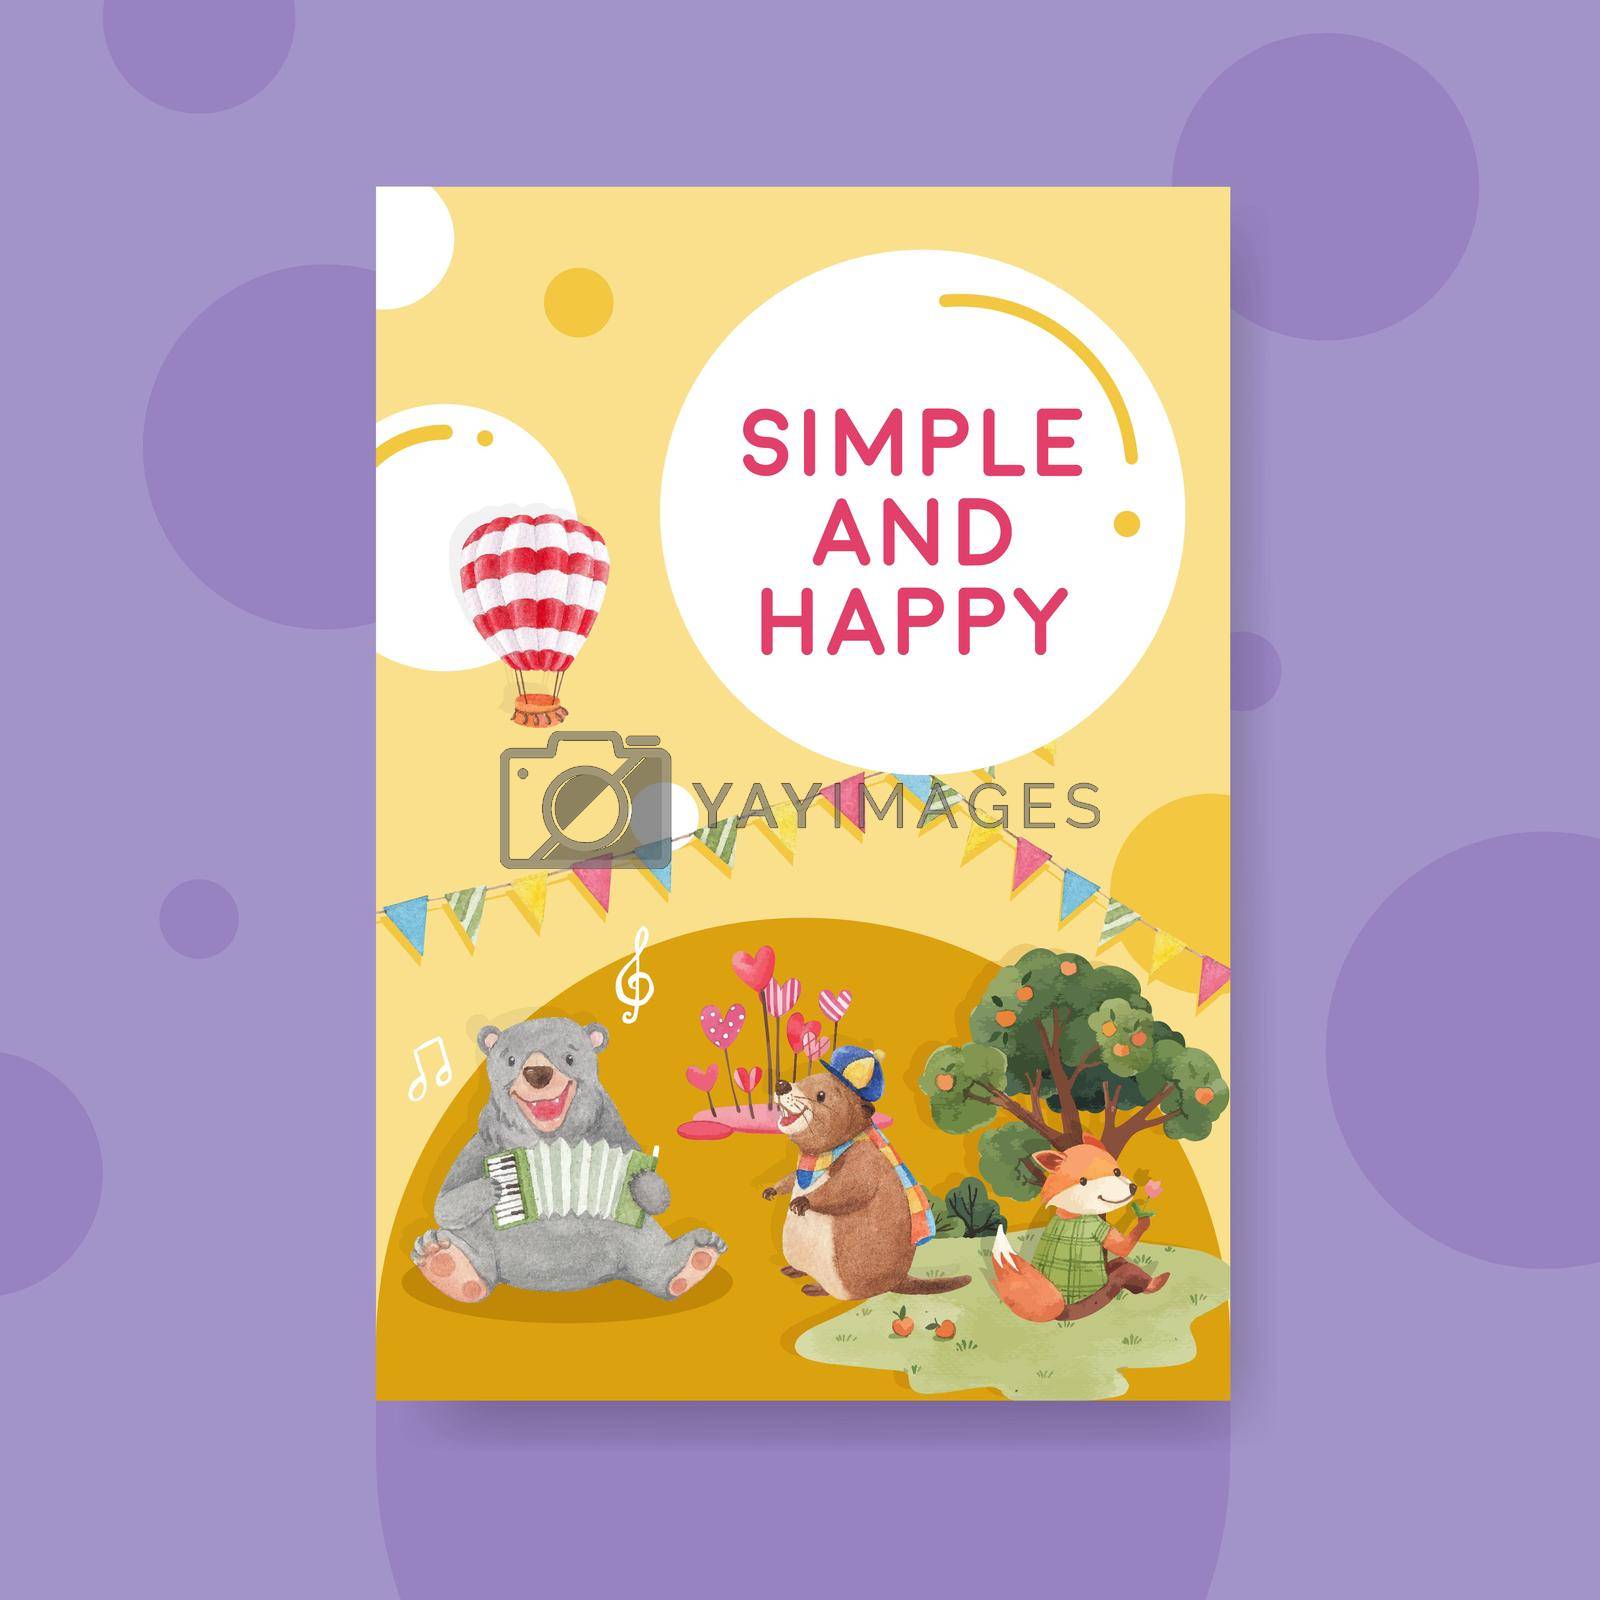 Poster template with happy animals concept design watercolor illustration
